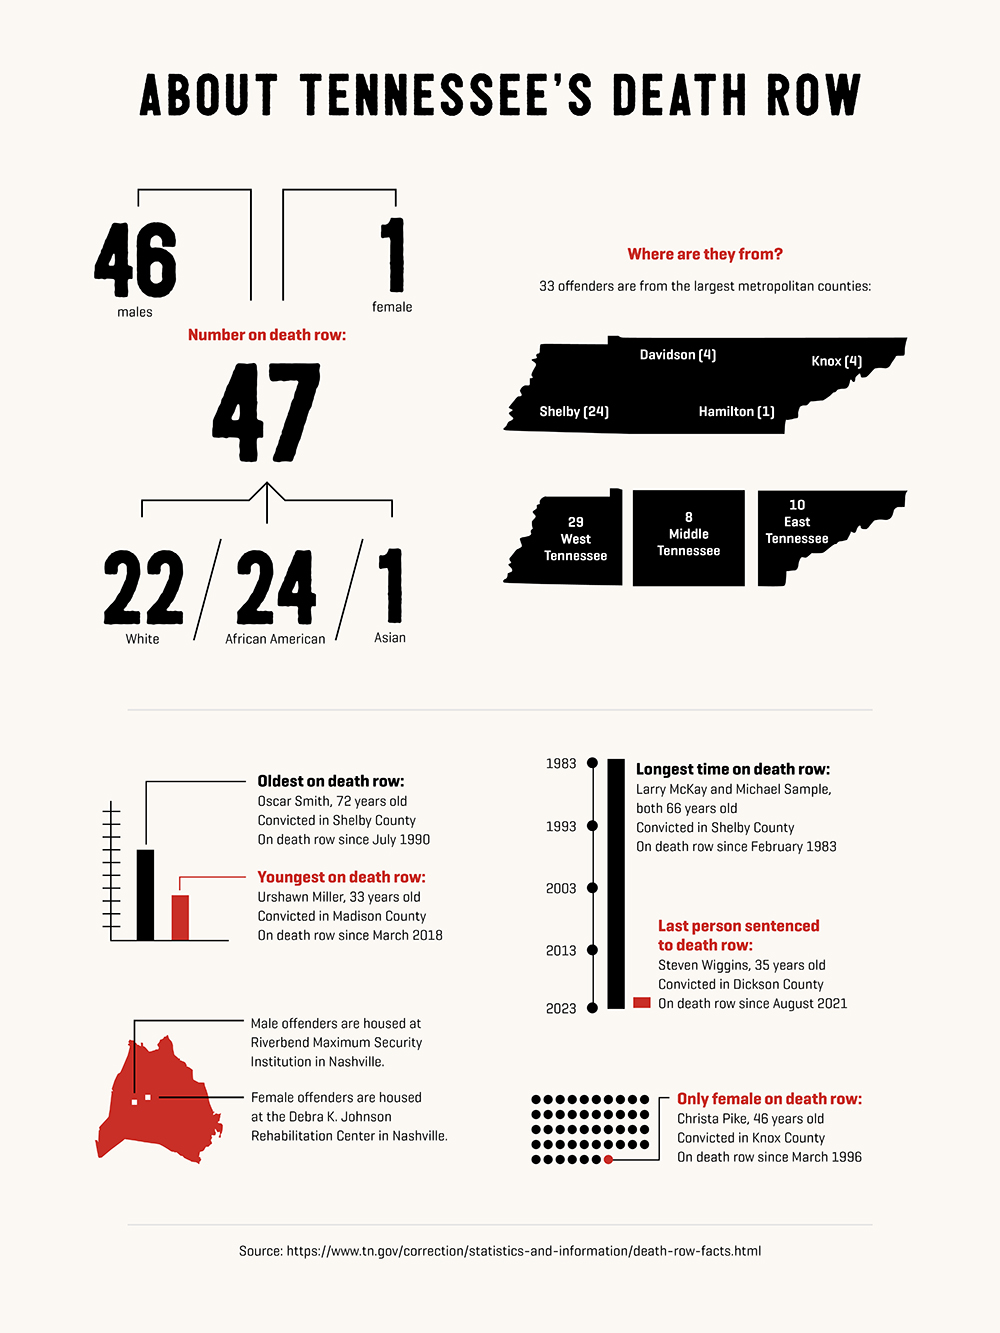 facts about Tennessee's death row